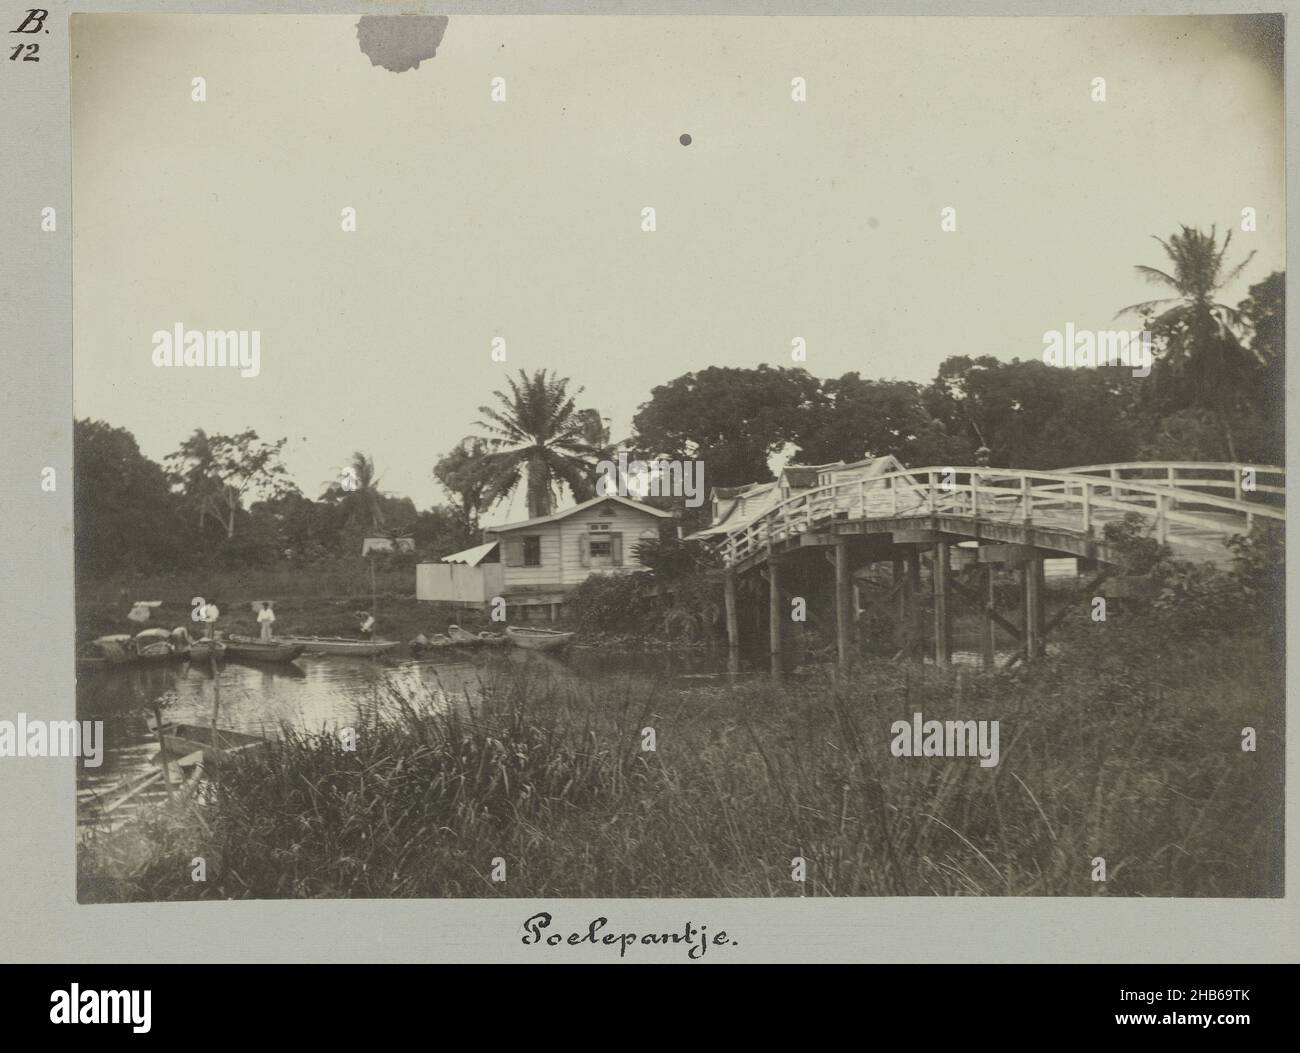 Poelepantje (title on object), The wooden bridge Poelepantje in Paramaribo. Part of the photo album Souvenir de Voyage (part 2), about the life of the Doijer family in and around the plantation Ma Retraite in Suriname in the years 1906-1913., Hendrik Doijer (attributed to), Suriname, 1906 - 1913, photographic support, gelatin silver print, height 118 mm × width 161 mm Stock Photo